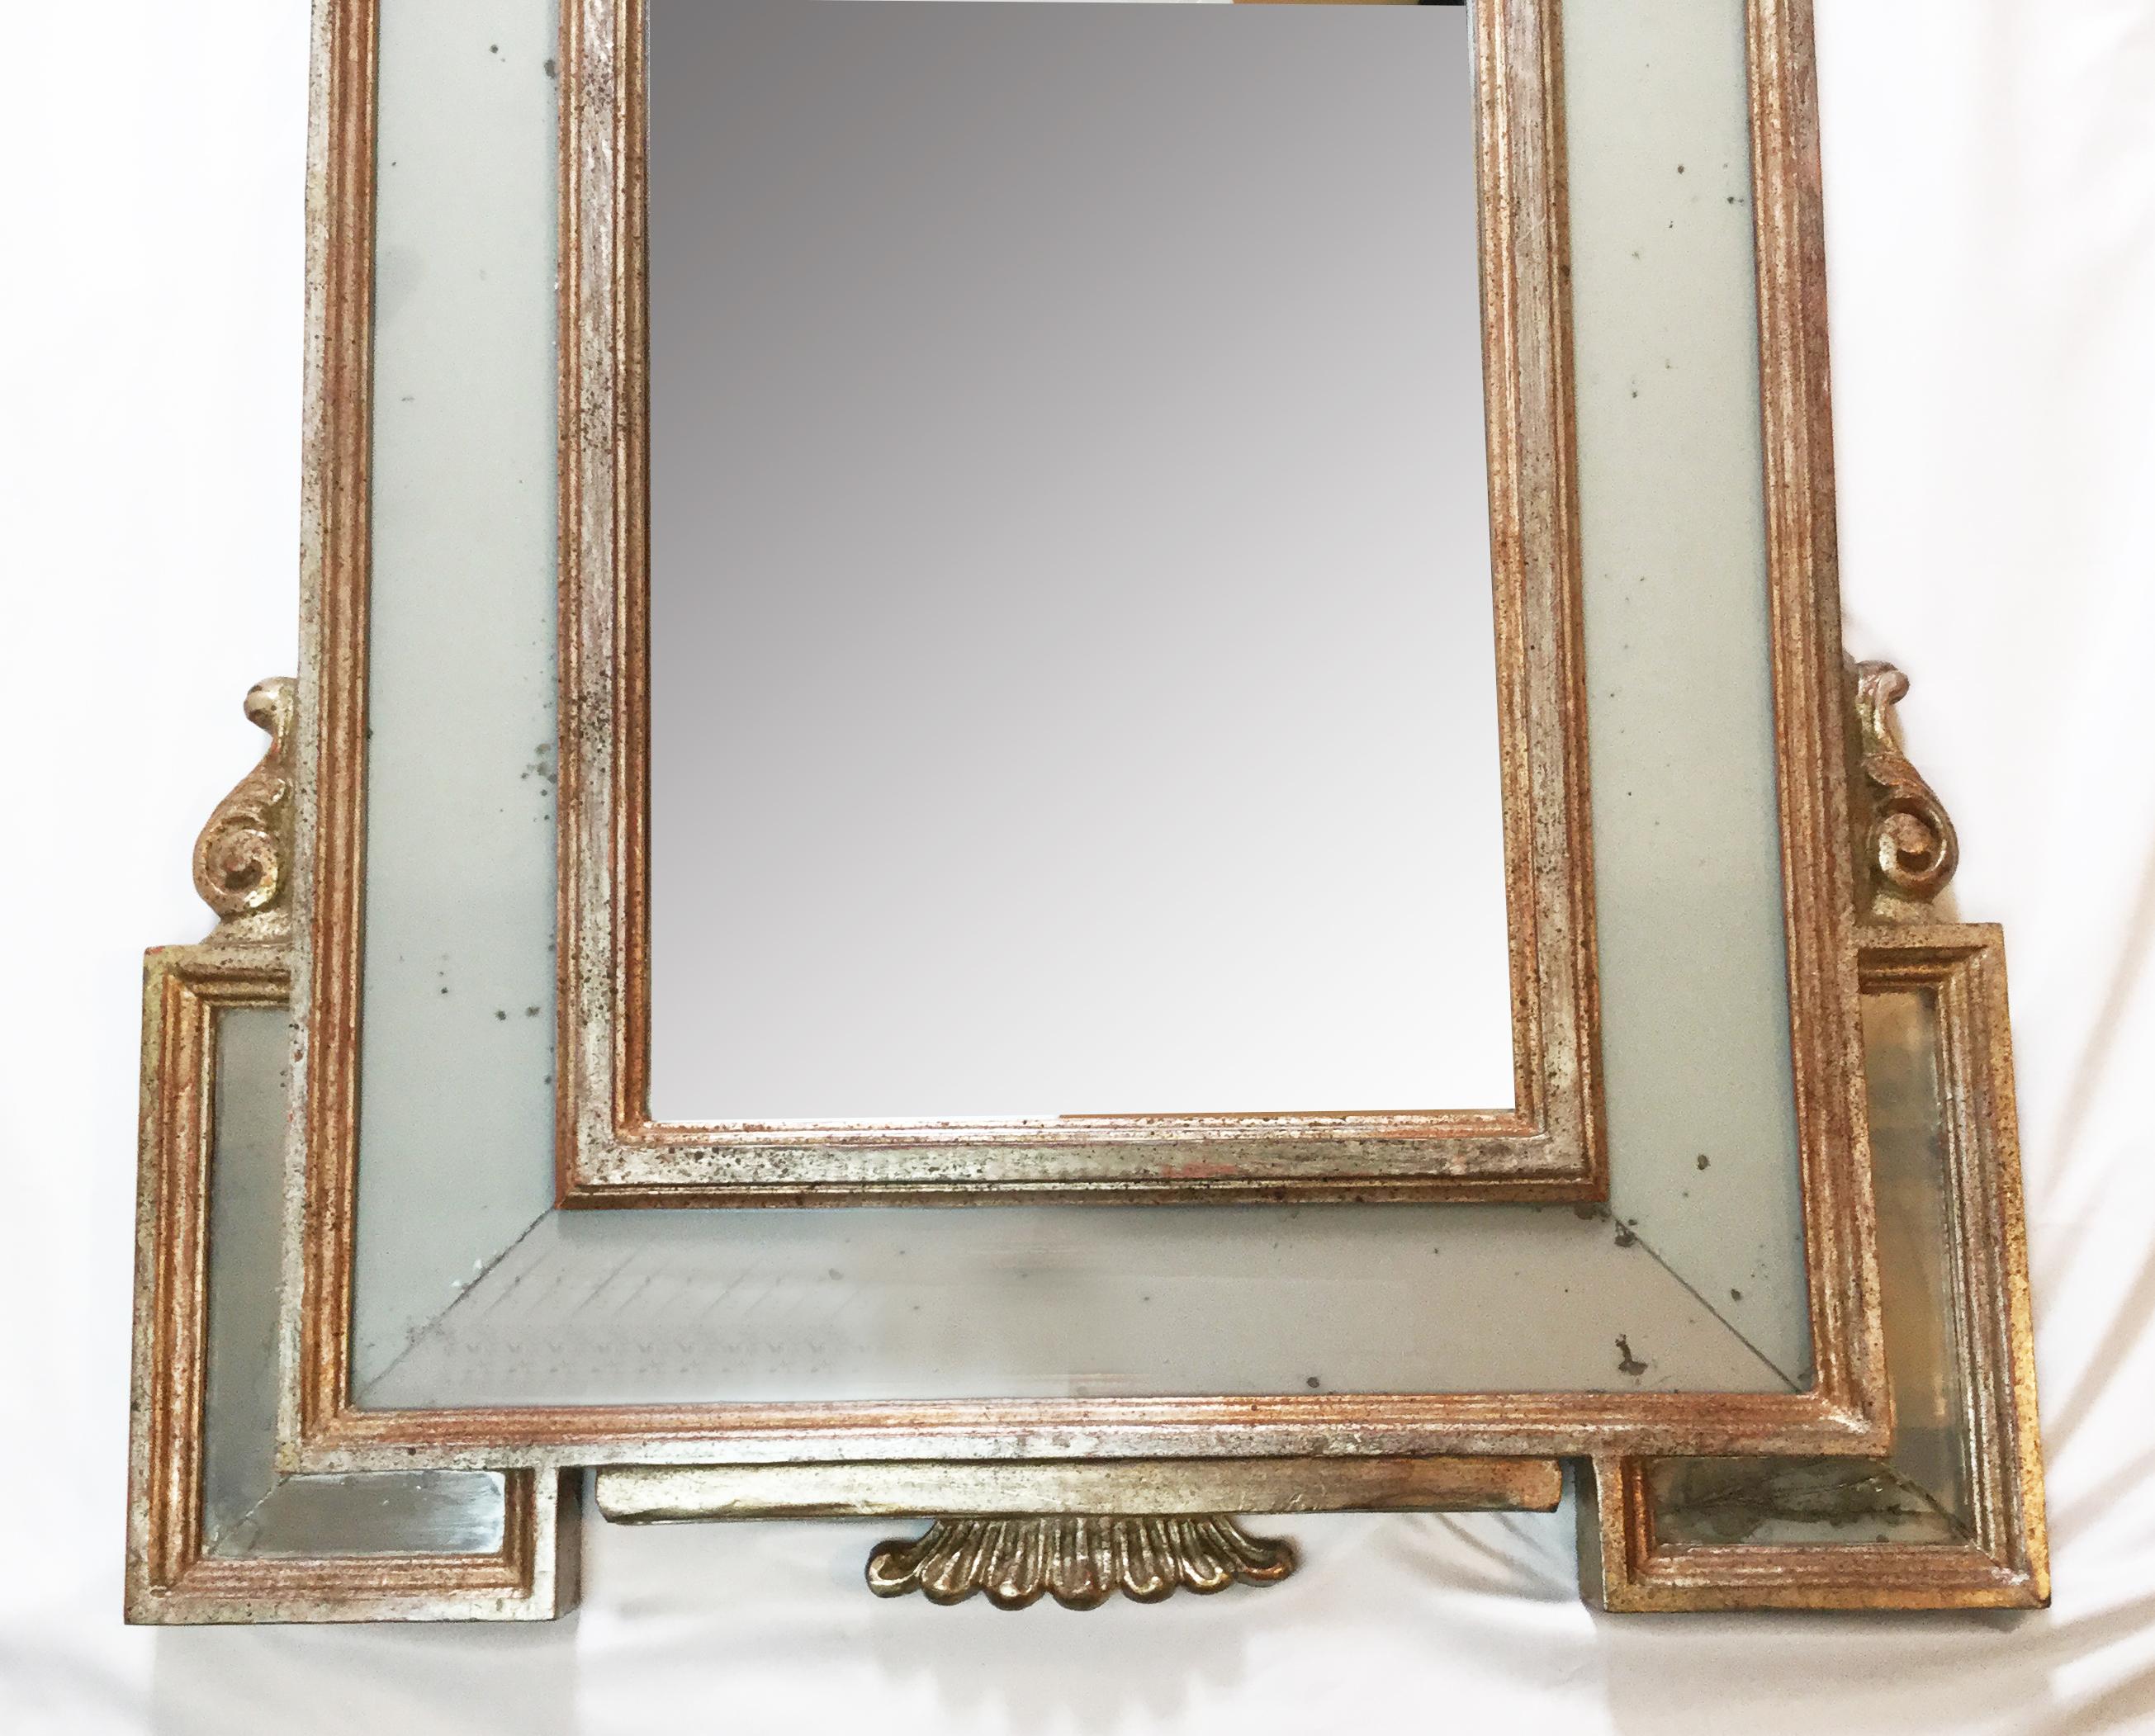 20th Century Elaborate Silver Giltwood Mirror with Églomisé Inserts